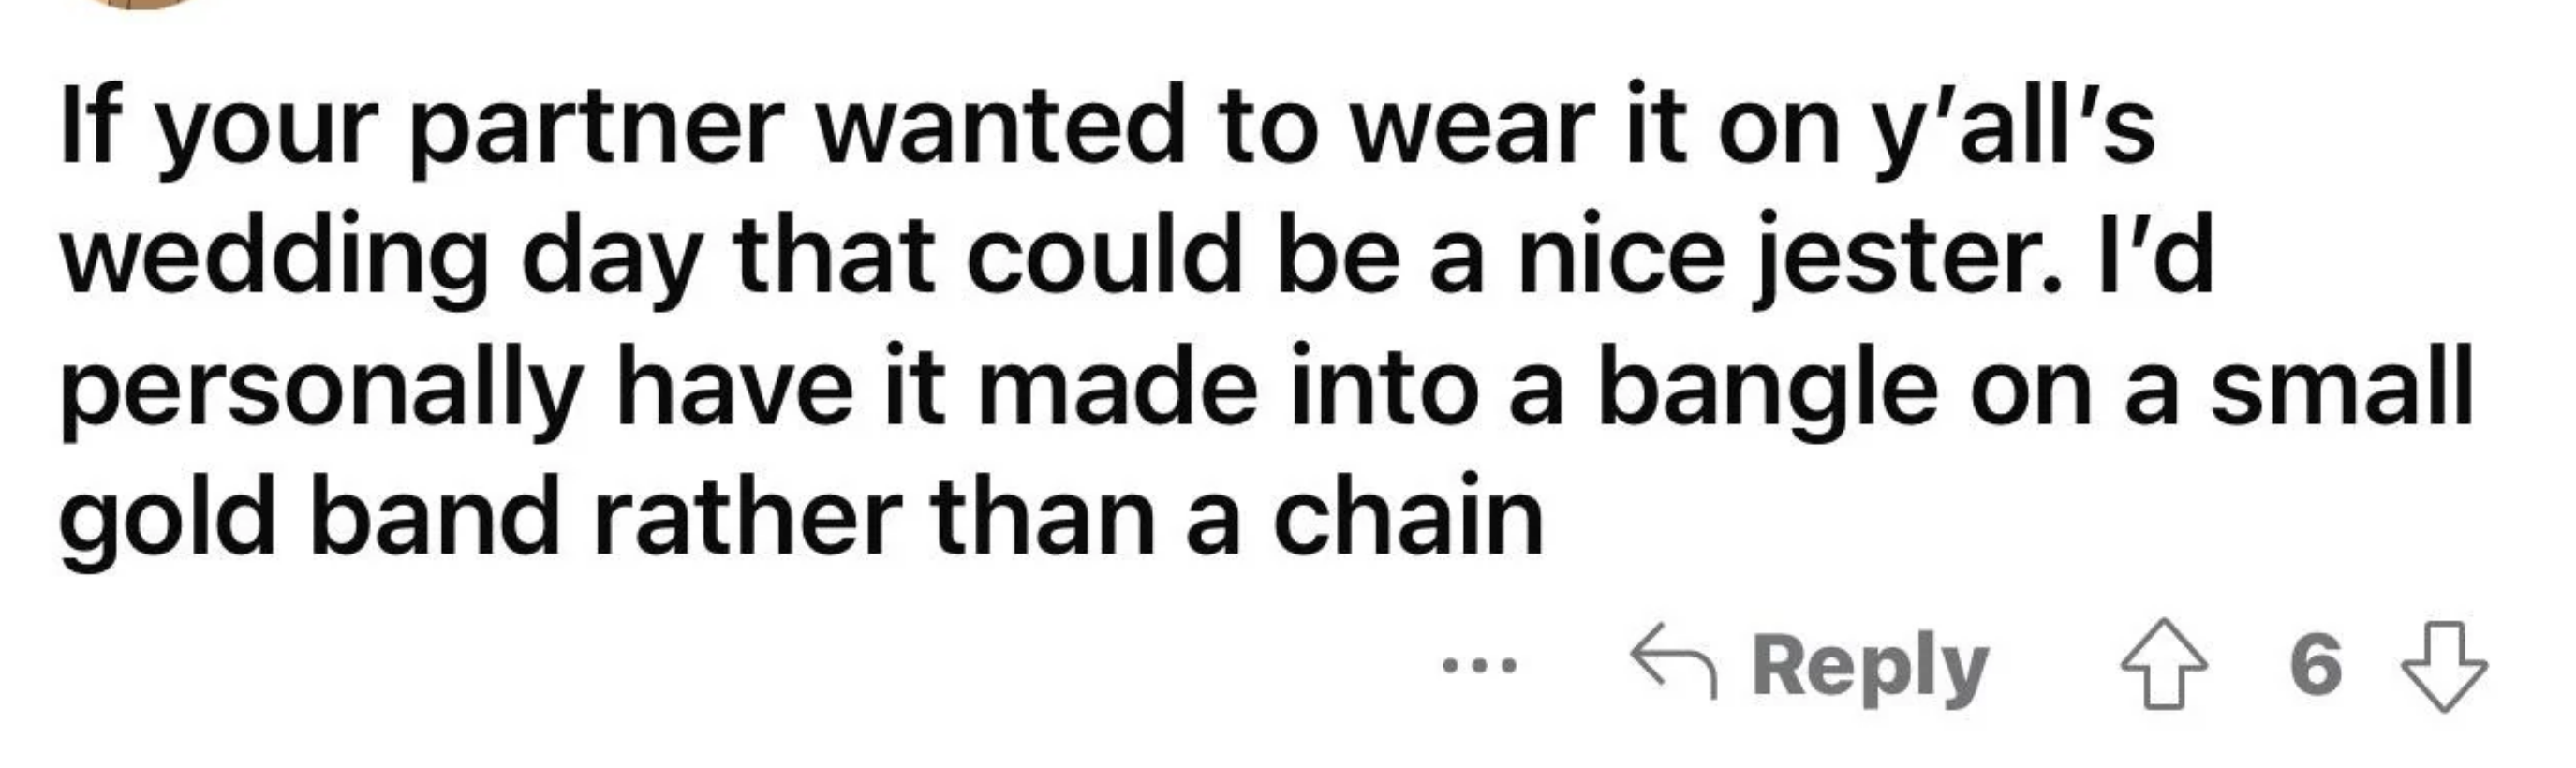 Comment suggests making a bangle from a gold band for a partner&#x27;s wedding day rather than a chain